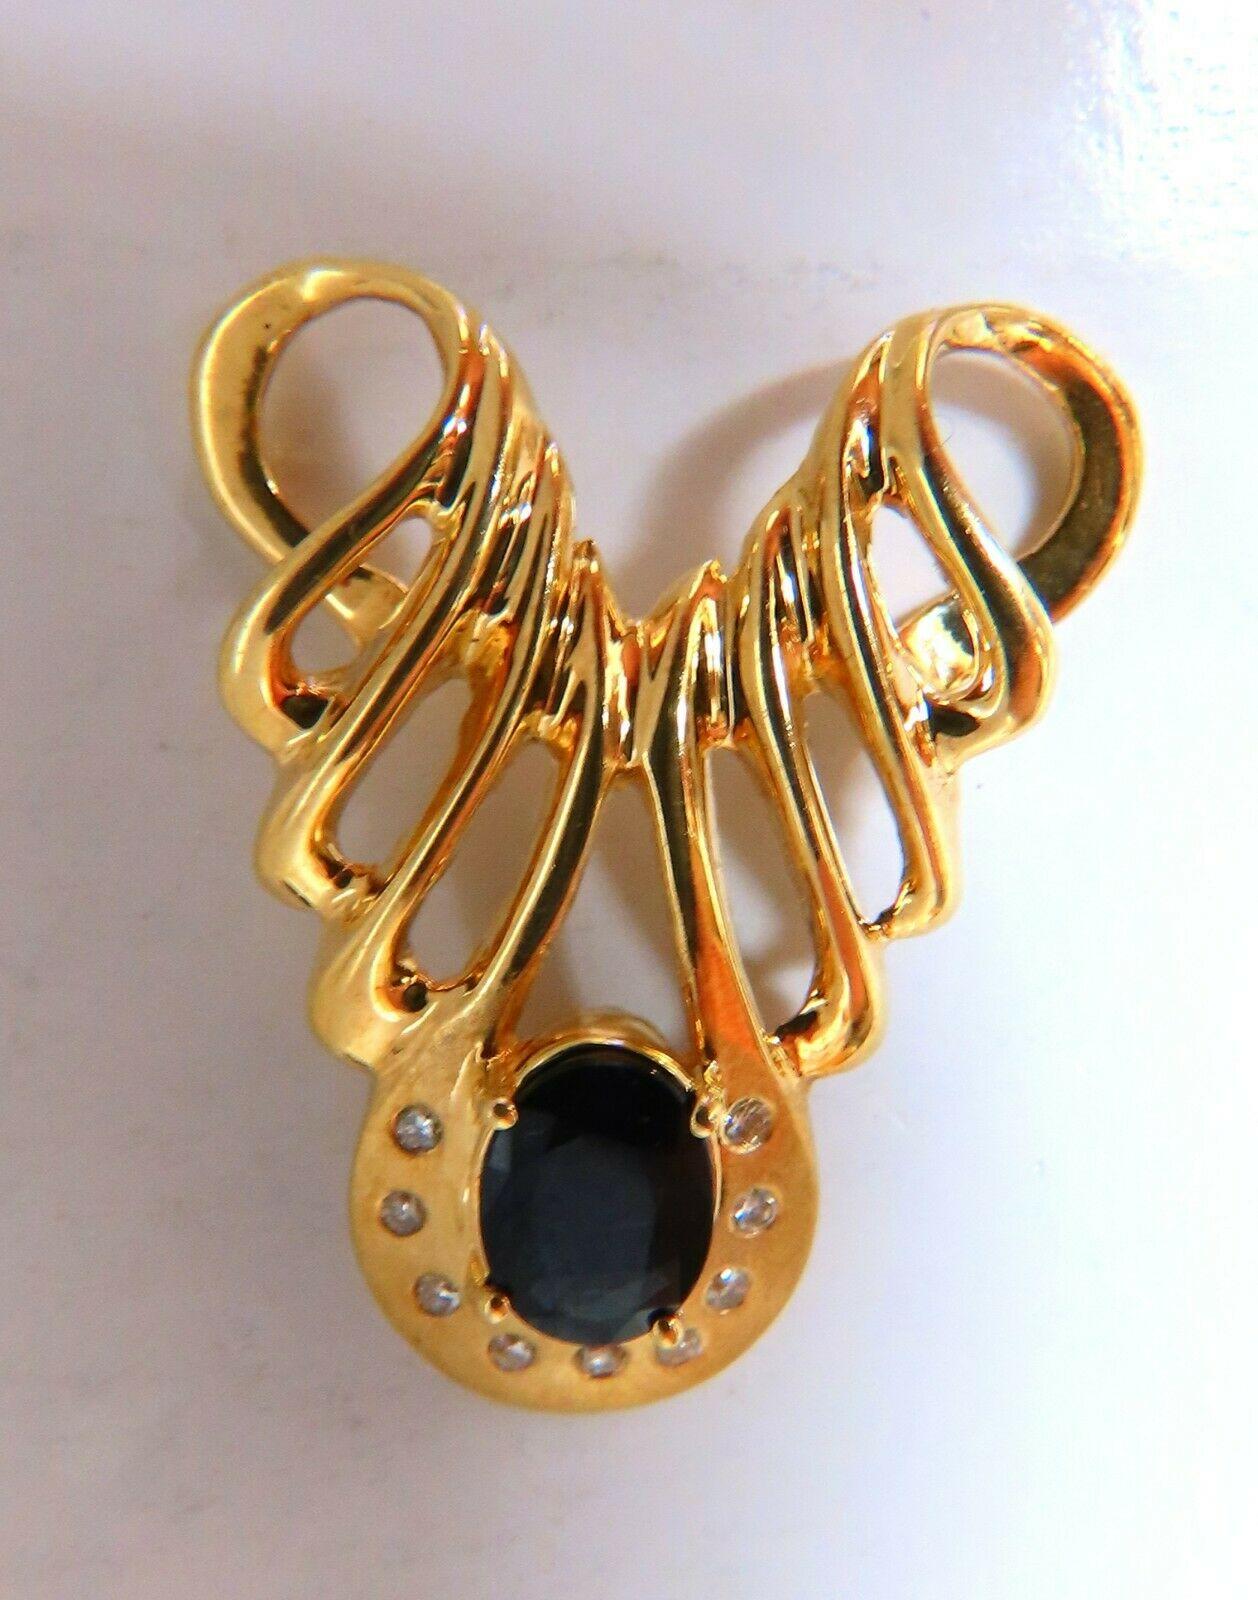 Wave Pattern Sapphire Slide Pendant

Made For Omega Cable Necklace 
1.75ct Natural Round Dark Midnight blue sapphire.

Oval Cut, Clean Clarity & Transparent.

5.7 grams

14kt yellow gold

Pendant measures: 30 x 25mm

will accept 8mm chain

